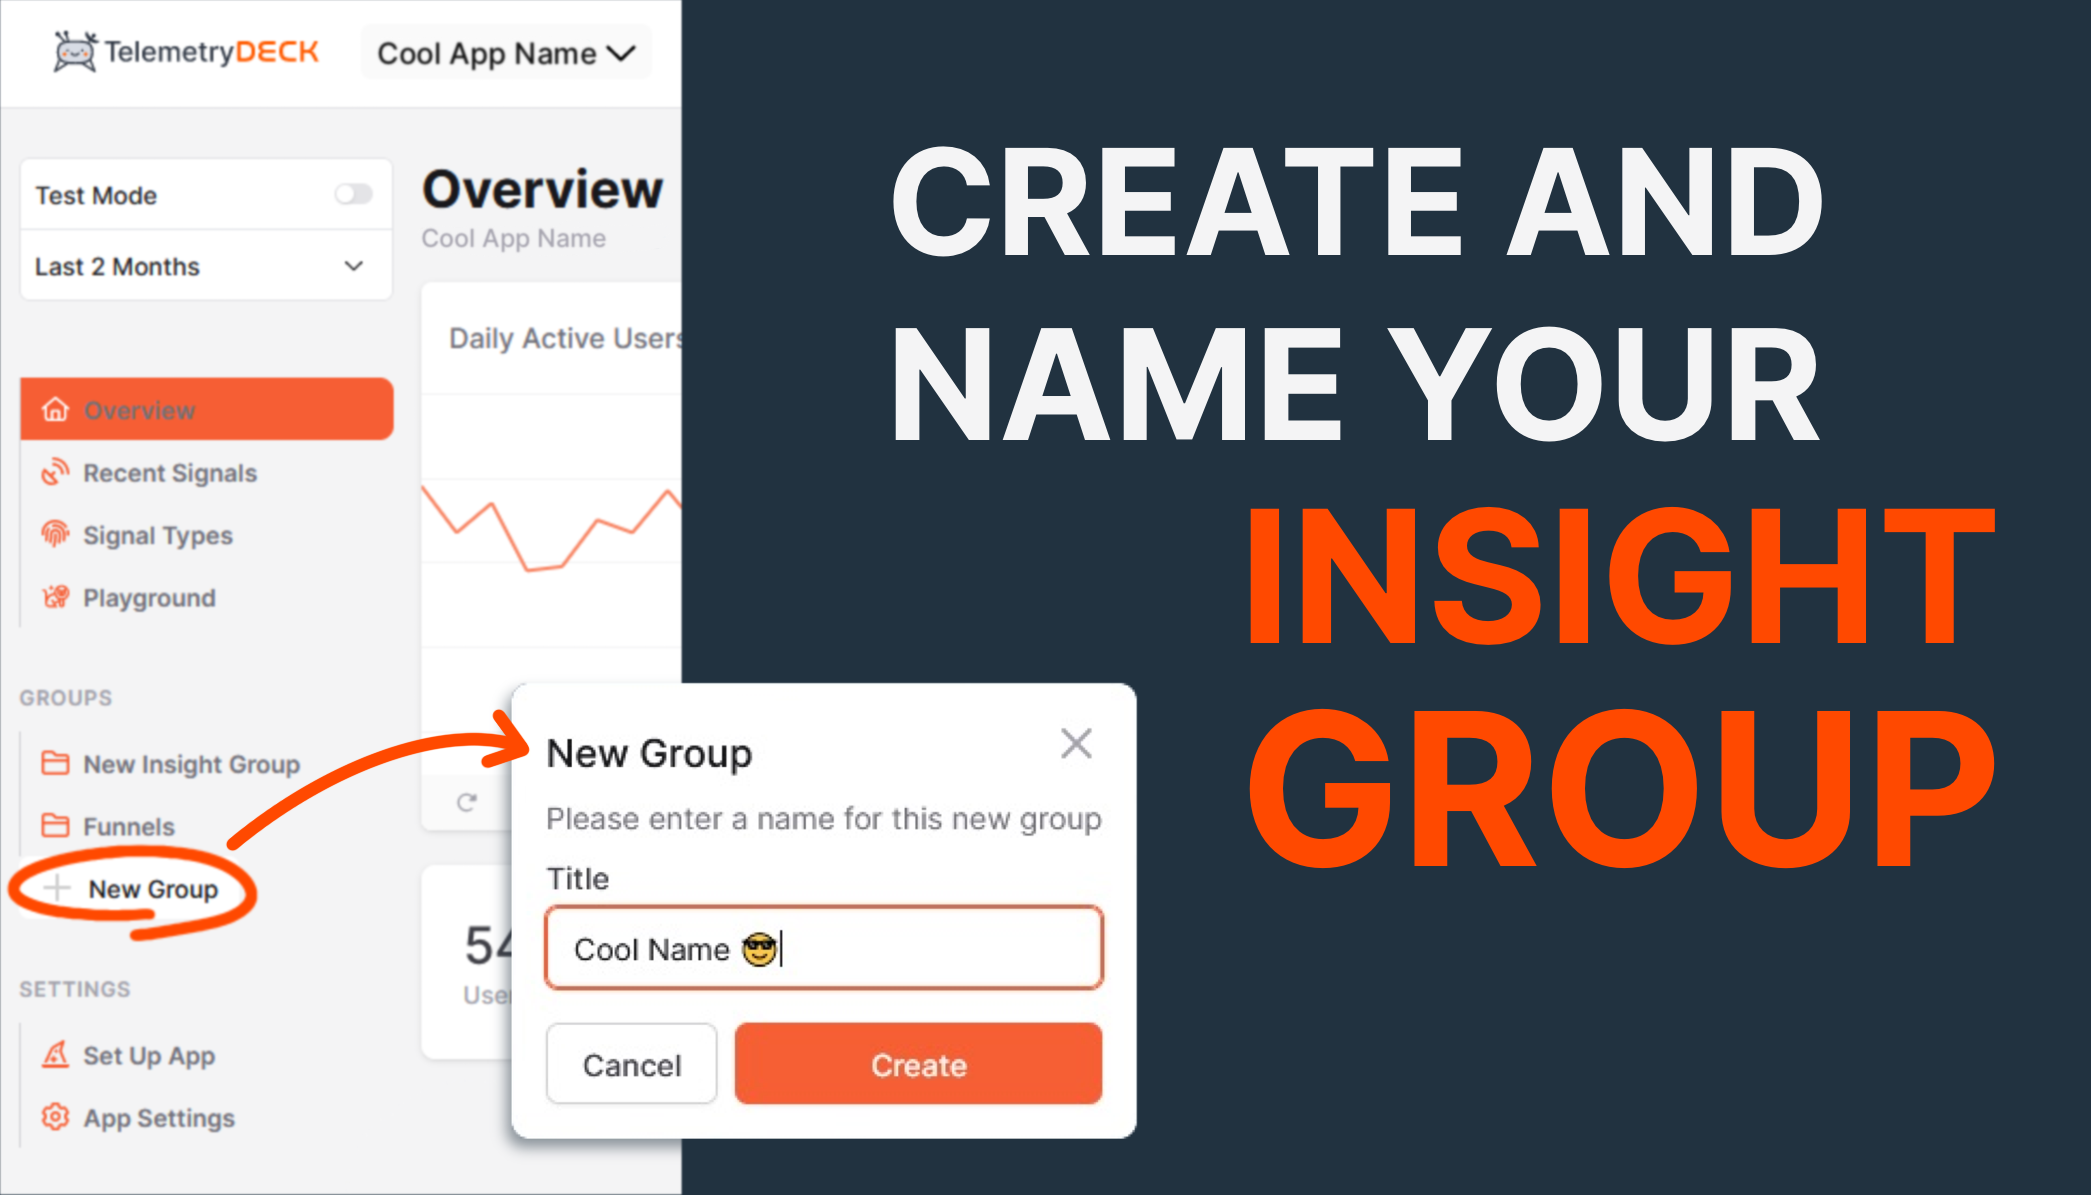 Location of the "Create New Group" Button